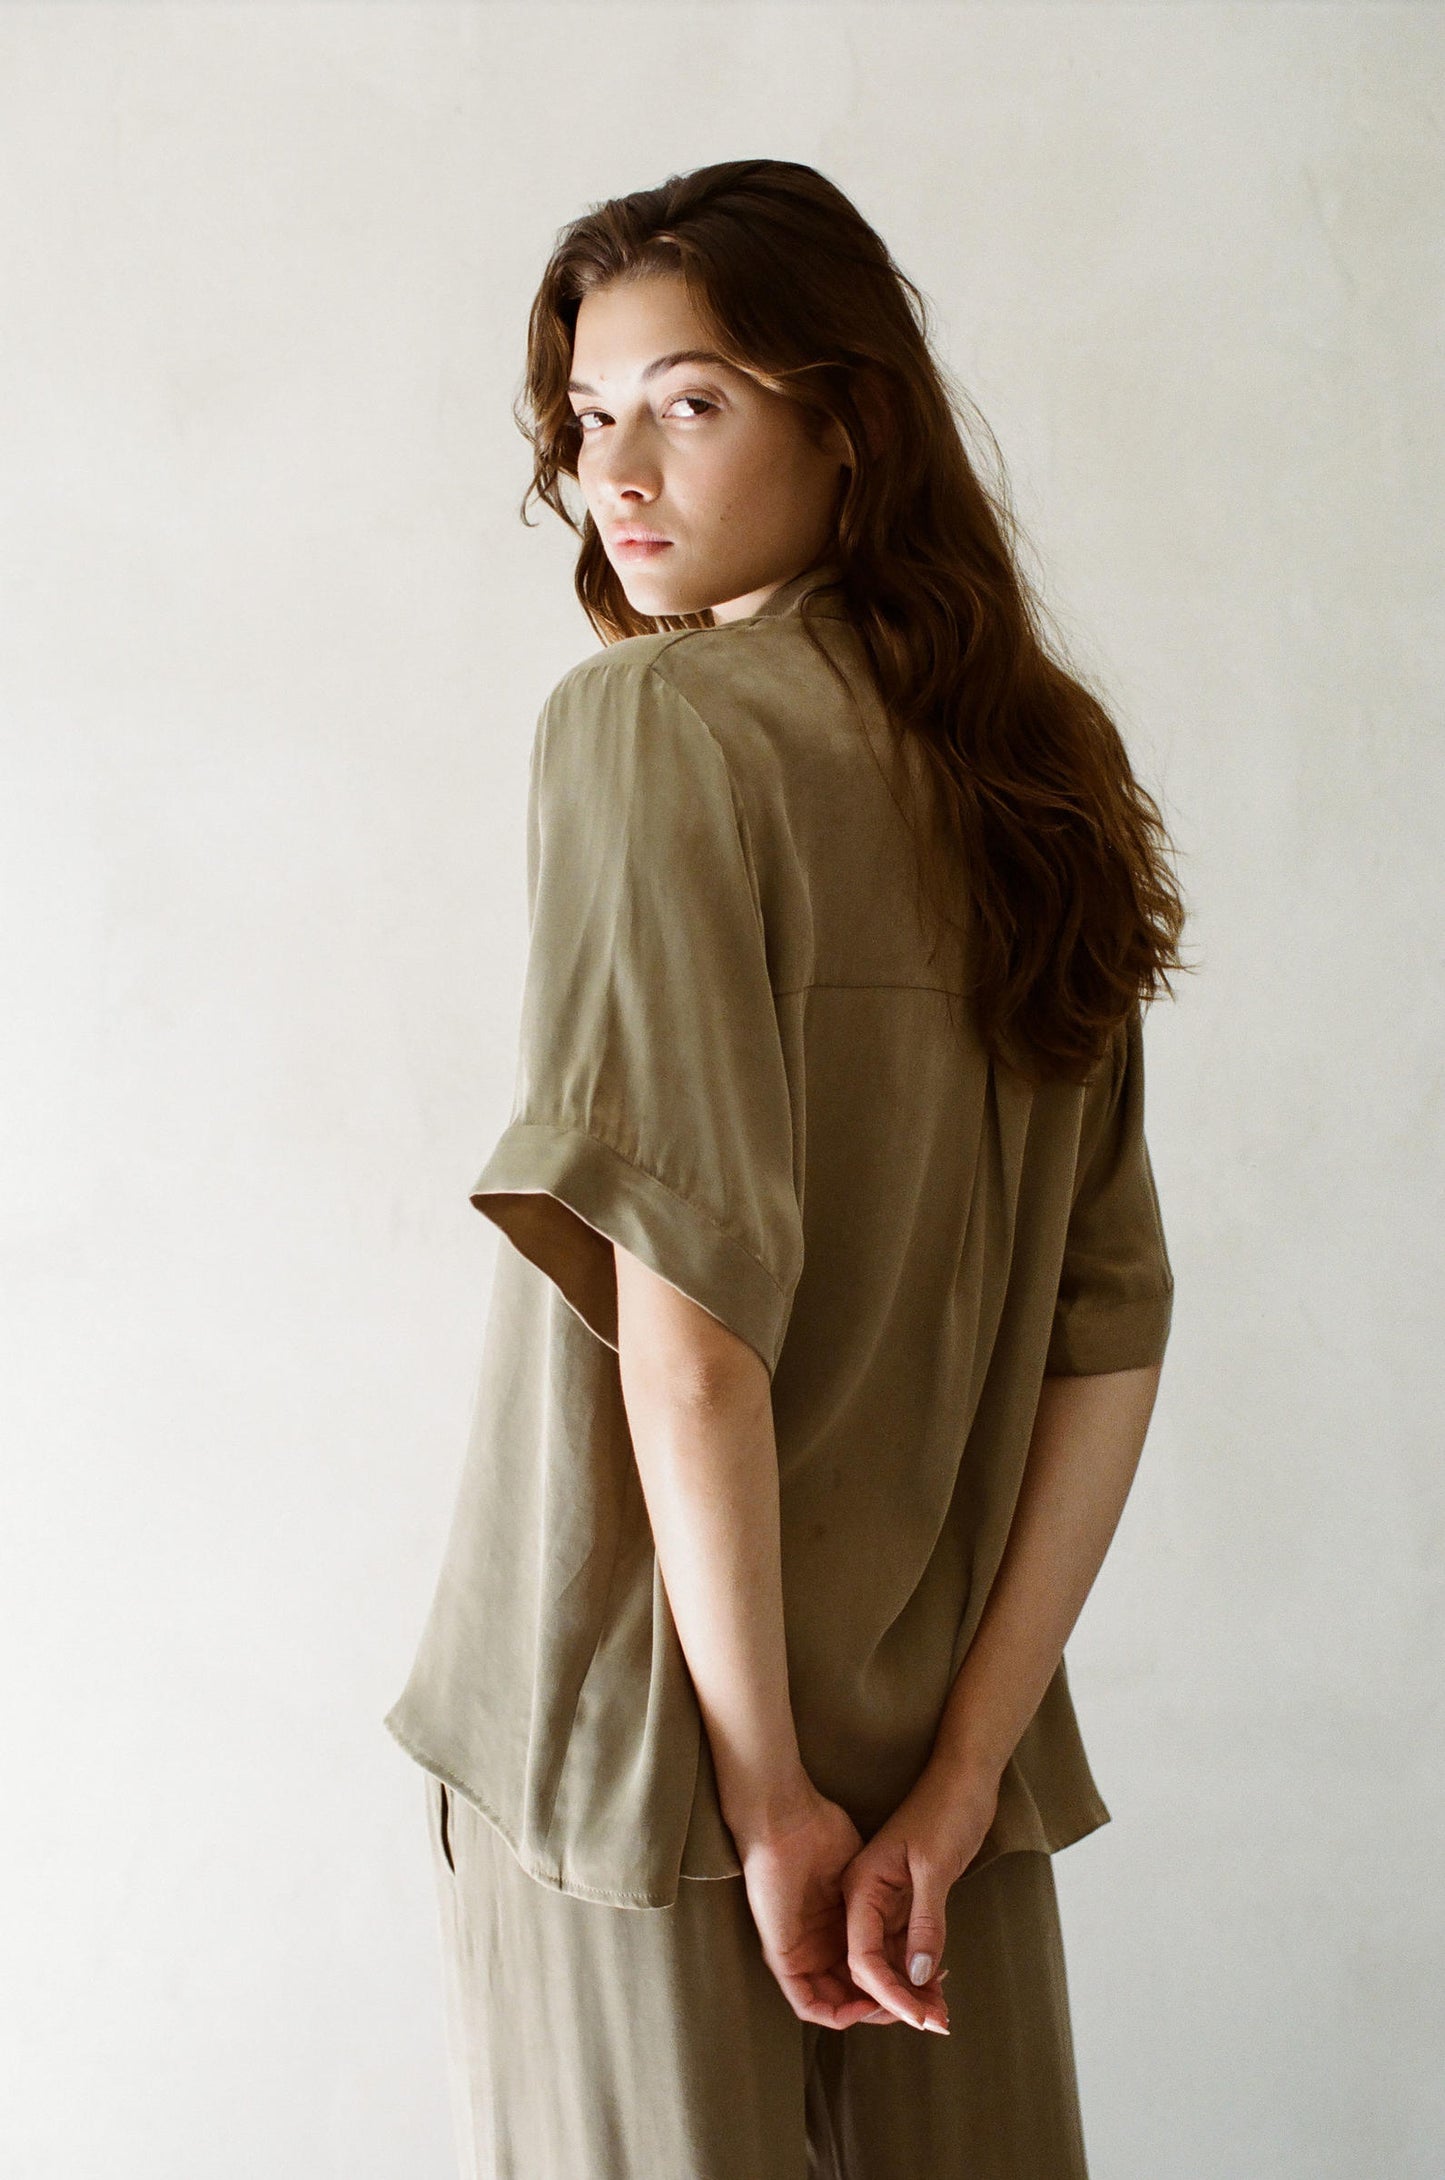 Delancey Shirt Top by A.Ren in Toffee